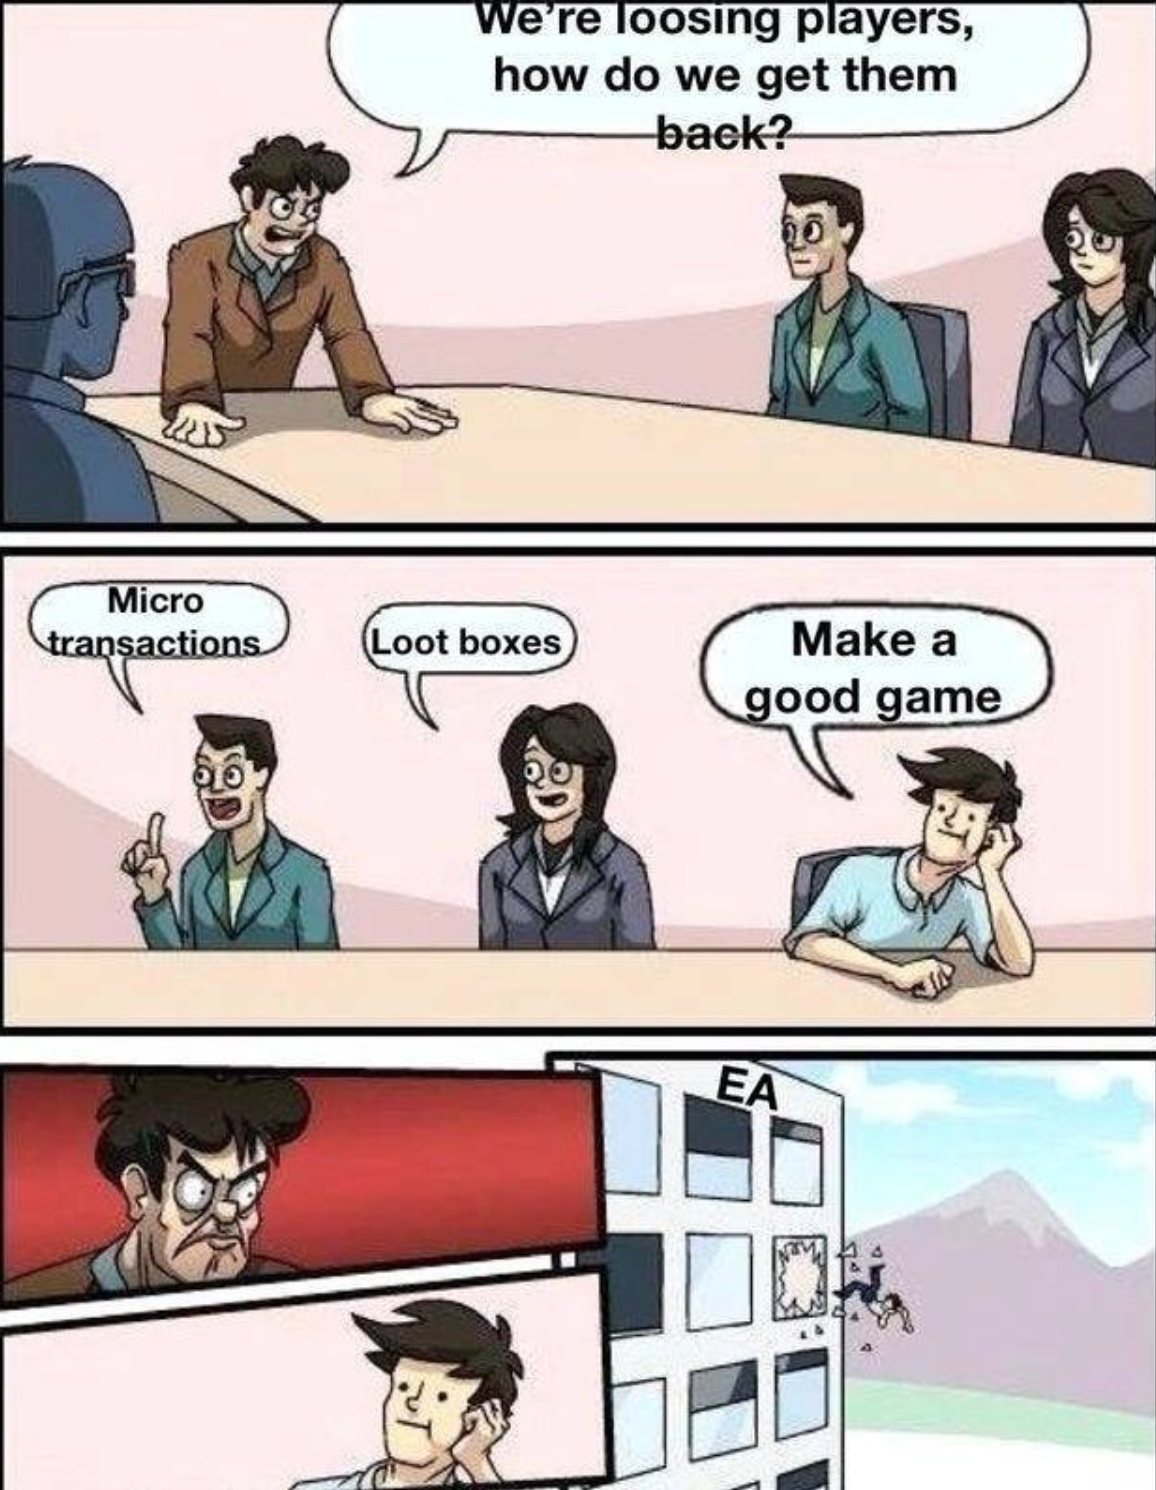 funny gaming memes  - board room meeting meme - We're loosing players, how do we get them back? Micro transactions Loot boxes Make a good game Ea